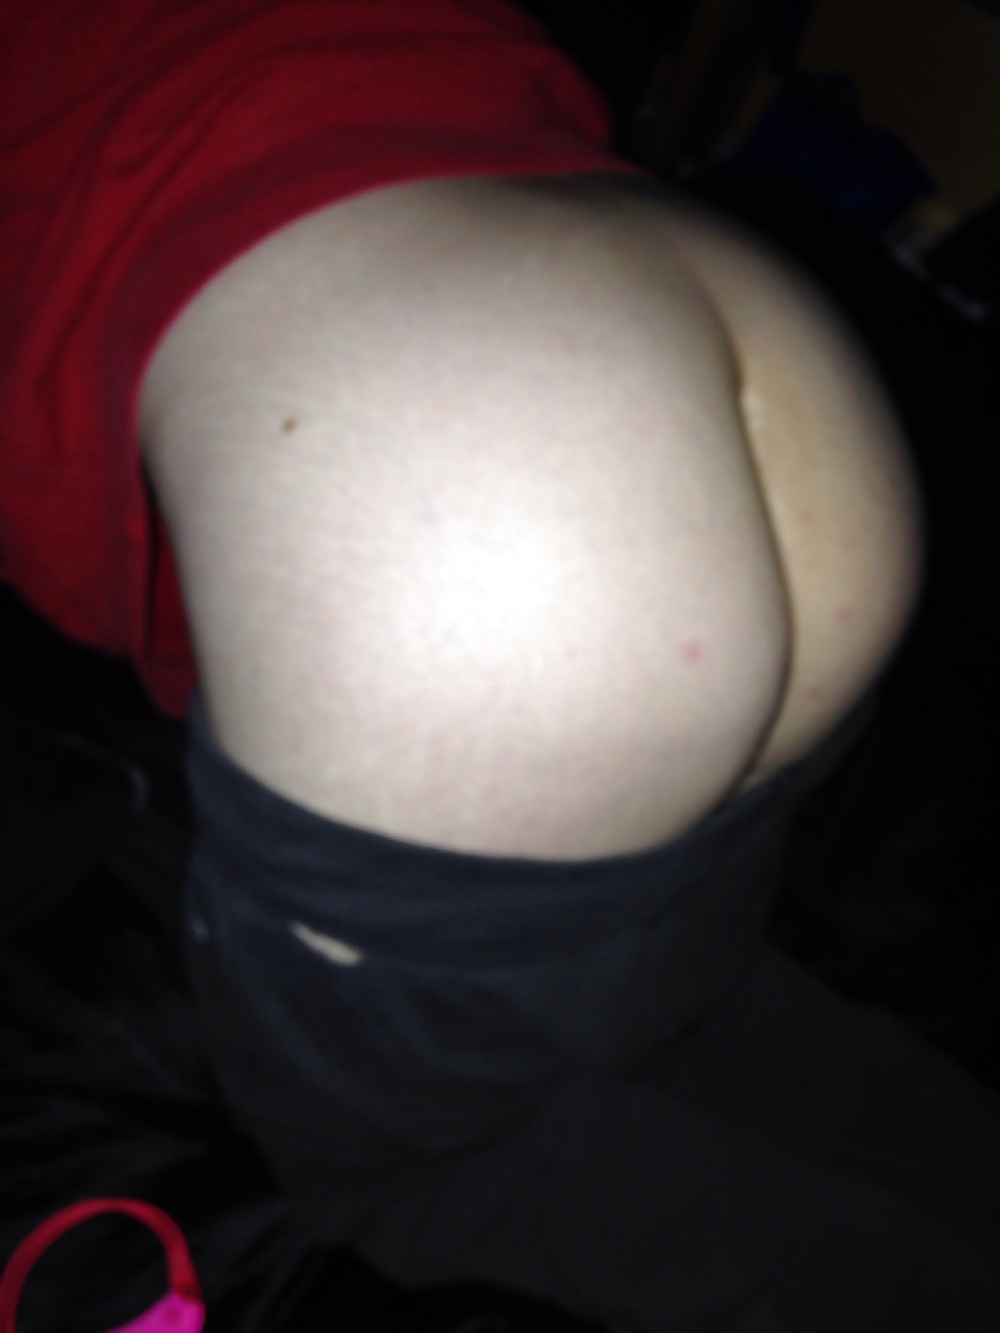 Free Wifes phat pale ass photos